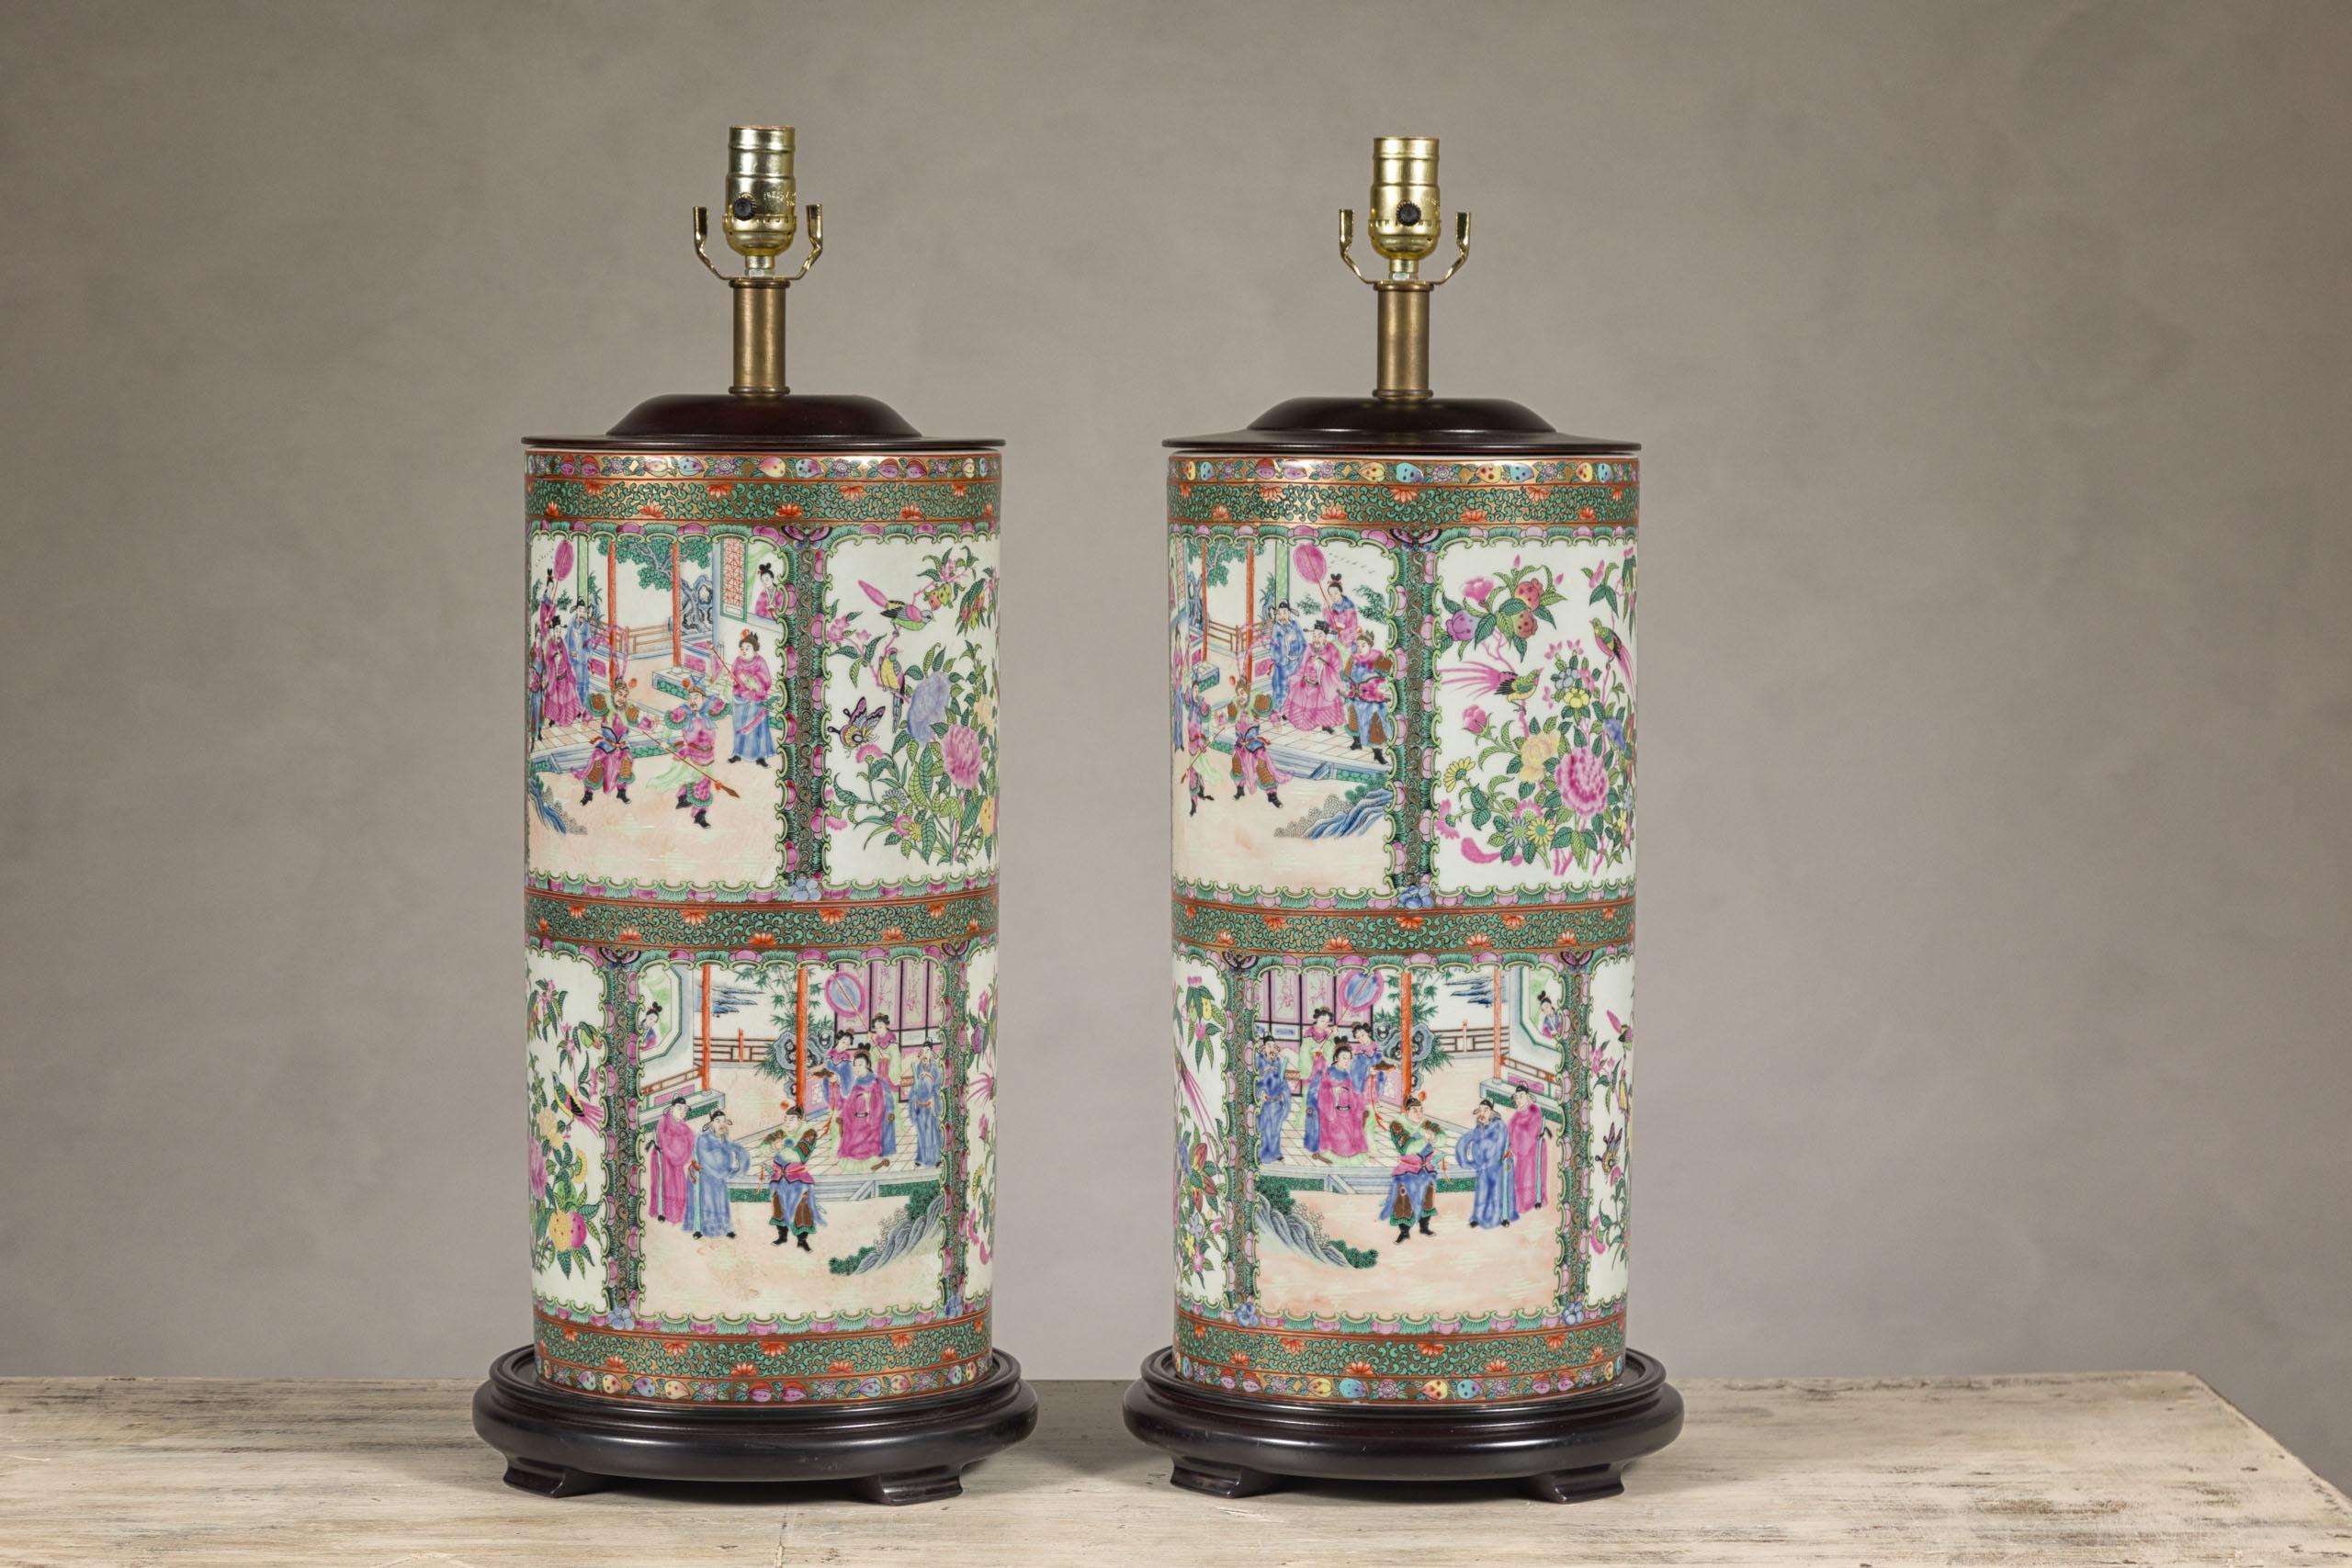 A pair of vintage hand-painted rose medallion Chinese table lamps depicting court scenes, birds and flowers in green, pink and white inset panels. Immerse yourself in history with this pair of hand-painted rose medallion table lamps, a testament to